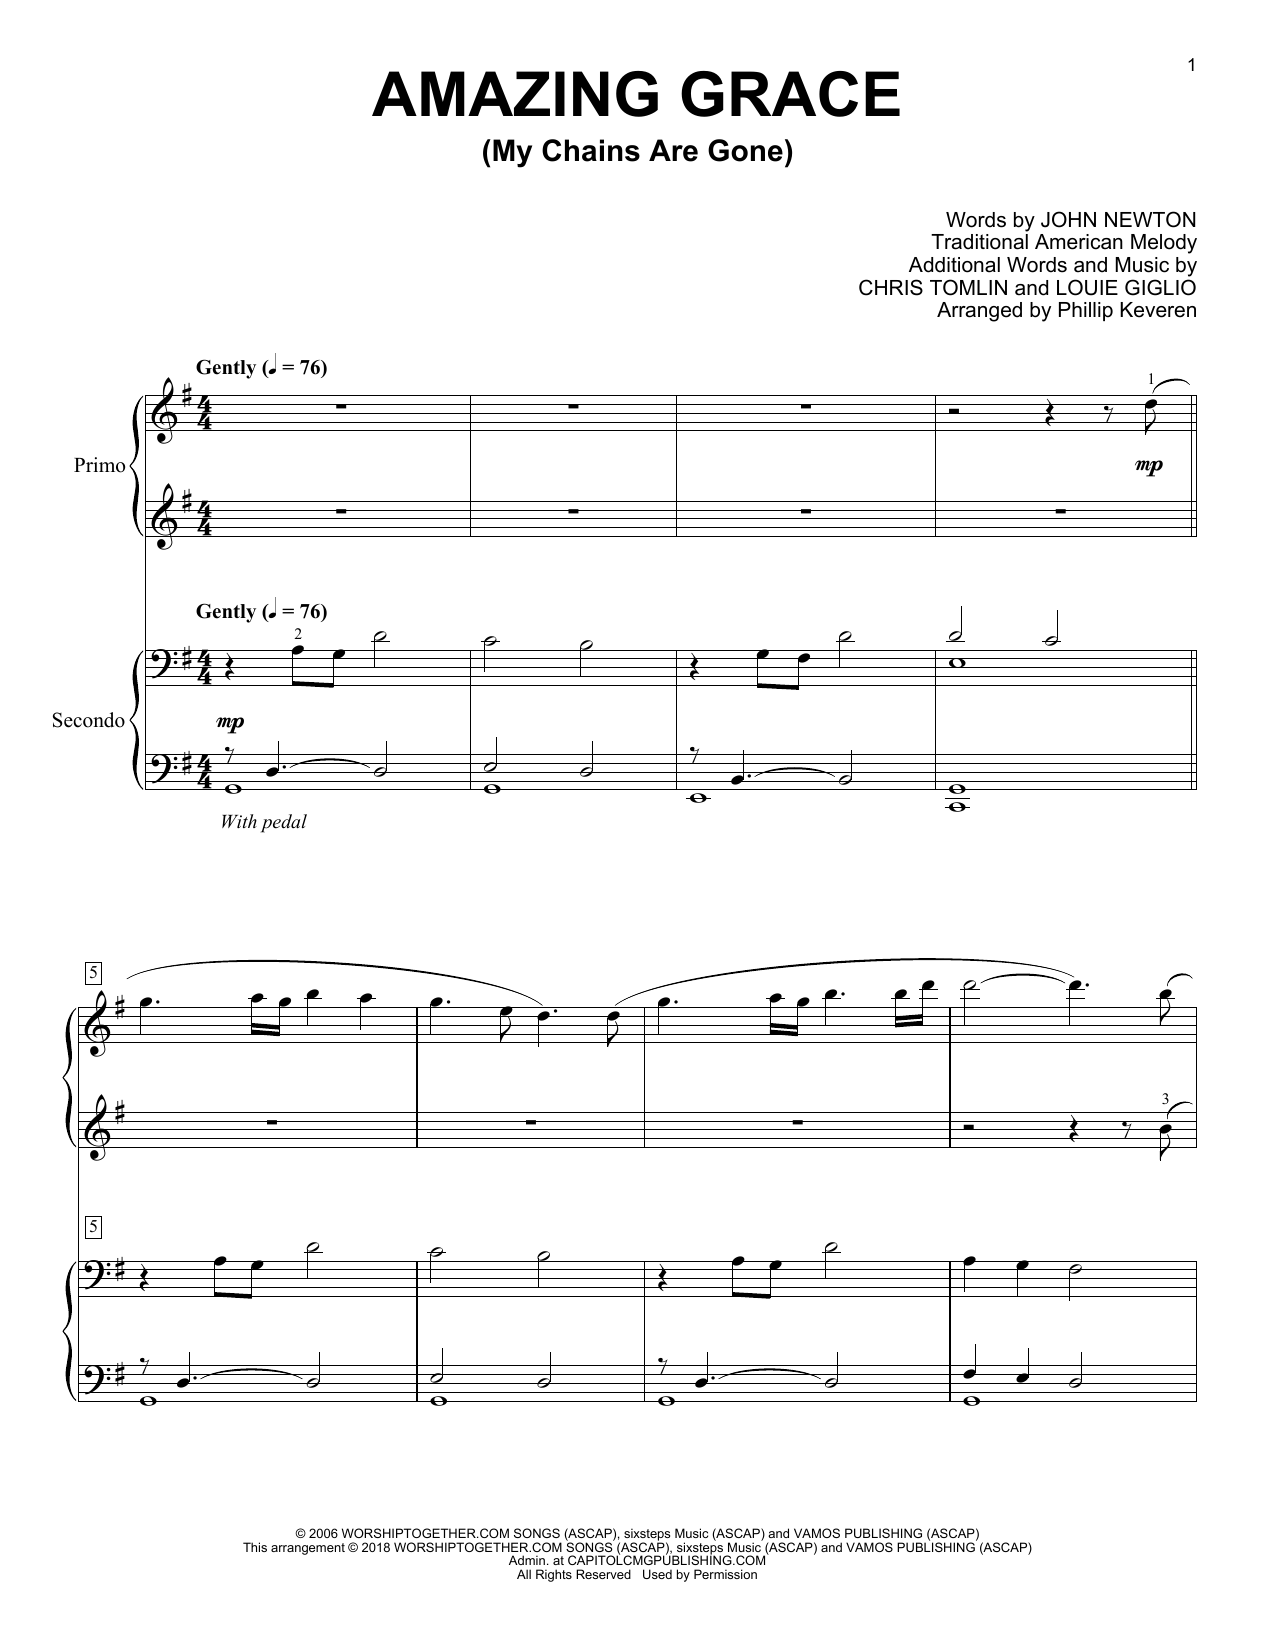 Download Chris Tomlin Amazing Grace (My Chains Are Gone) (arr Sheet Music